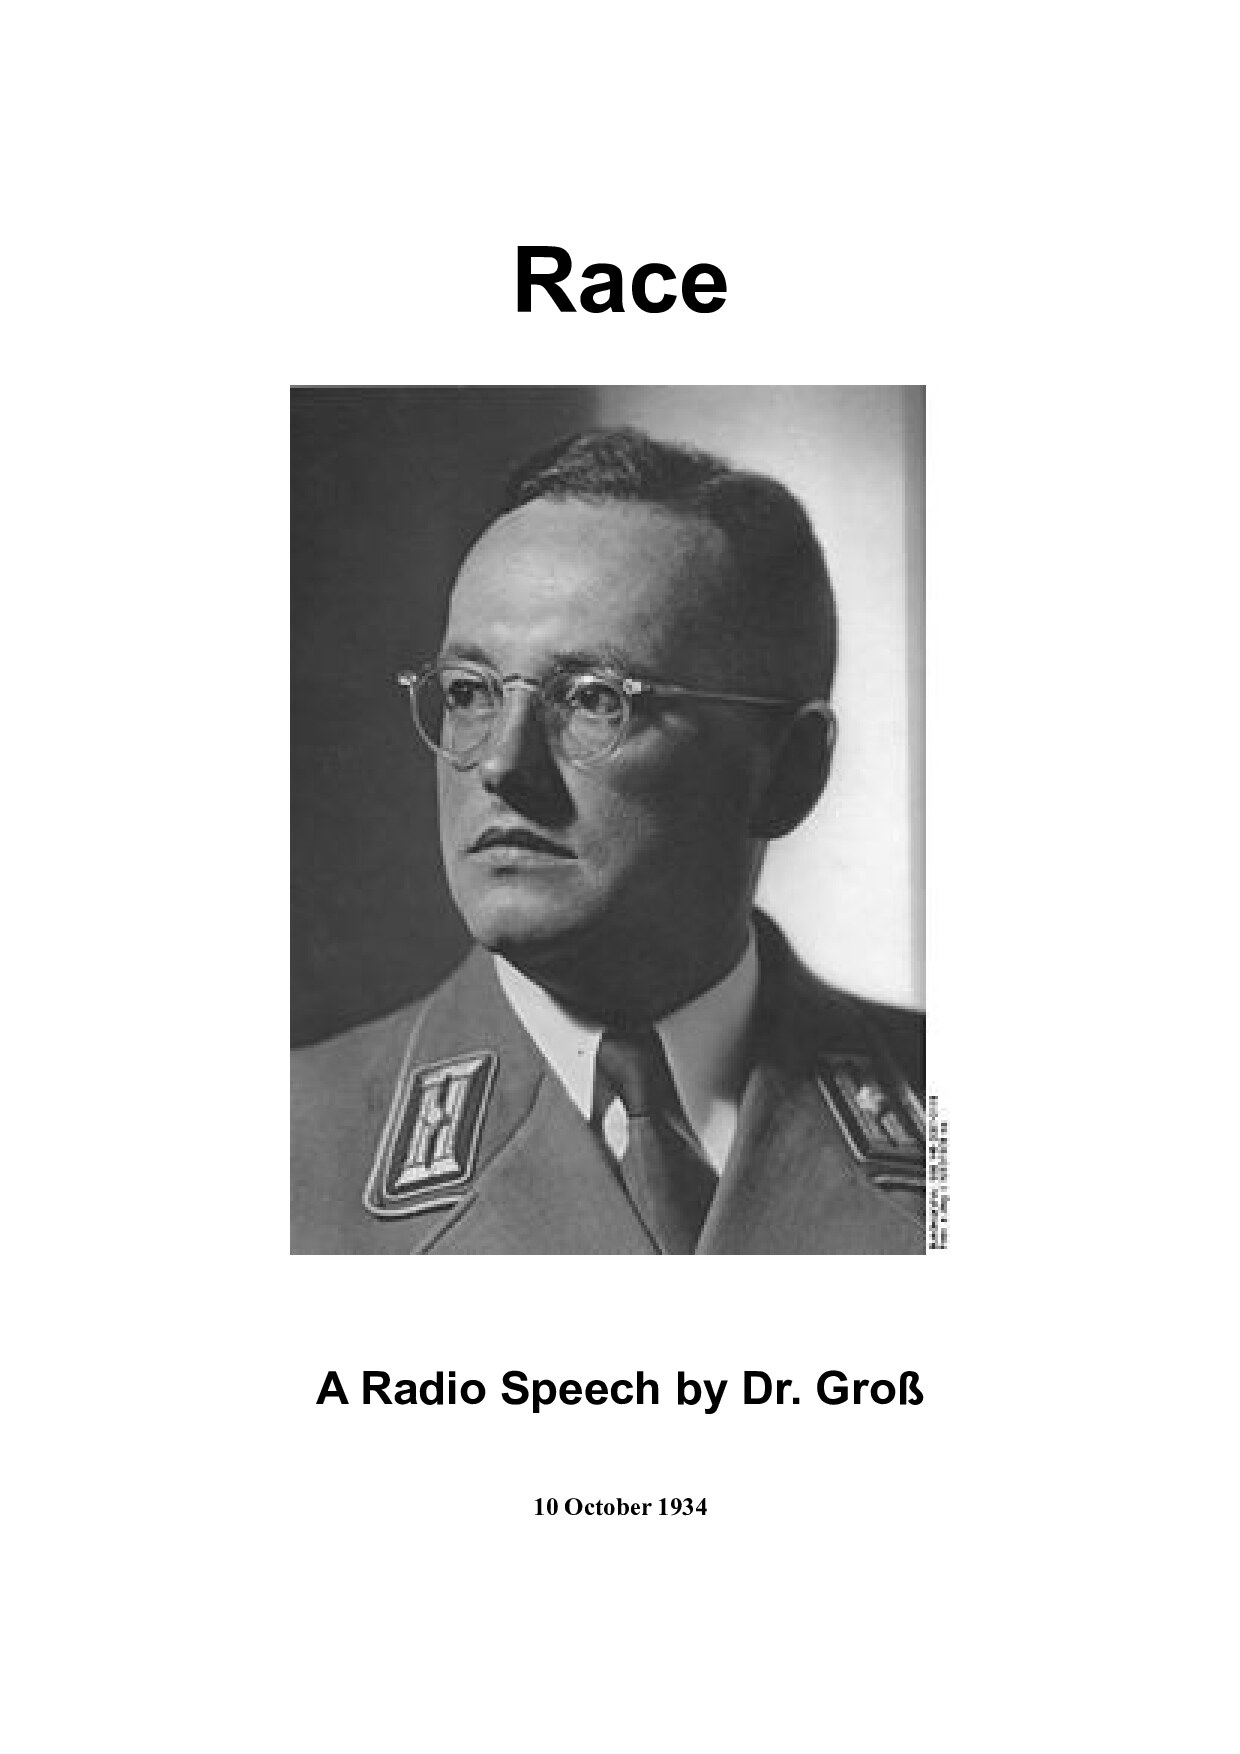 Gross, Walther; Race